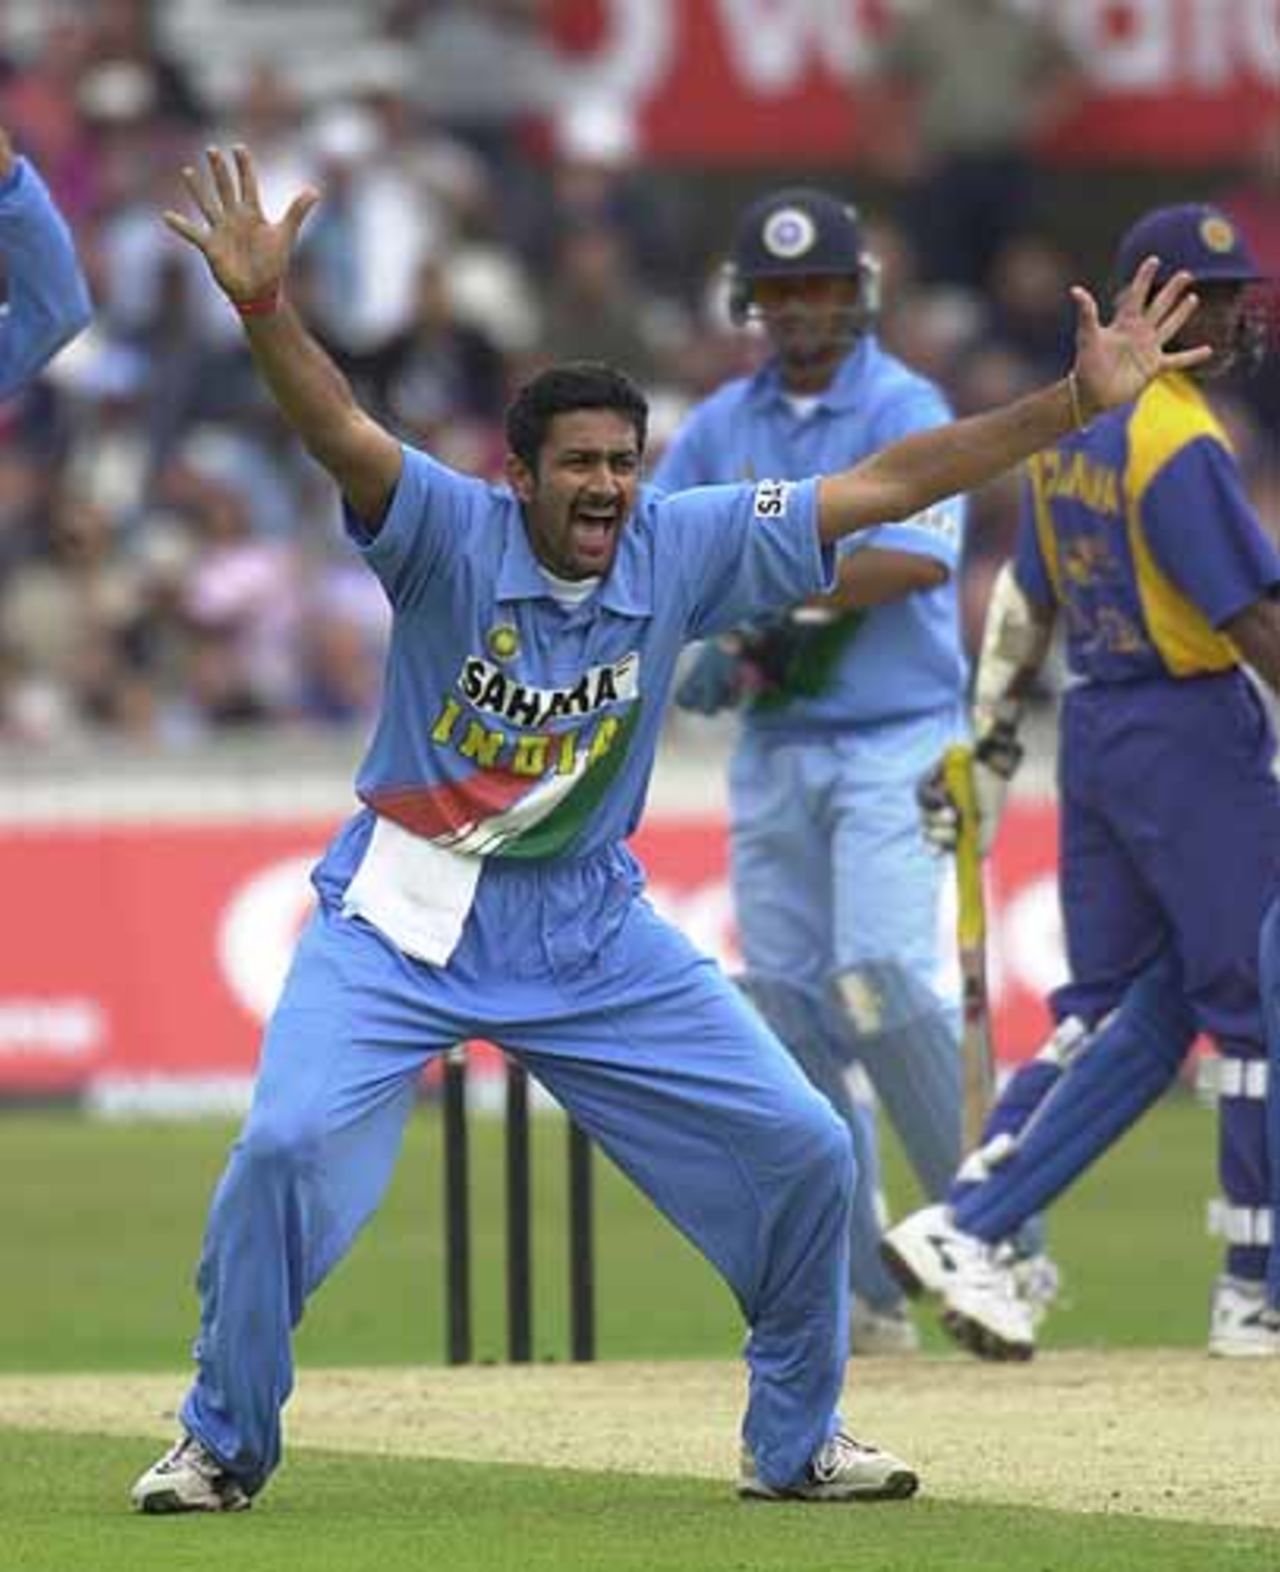 Anil Kumble belts out an appeal for the wicket of Chandana but does not get it, India v Sri Lanka, NatWest Series, The Oval, 30 Jun 2002